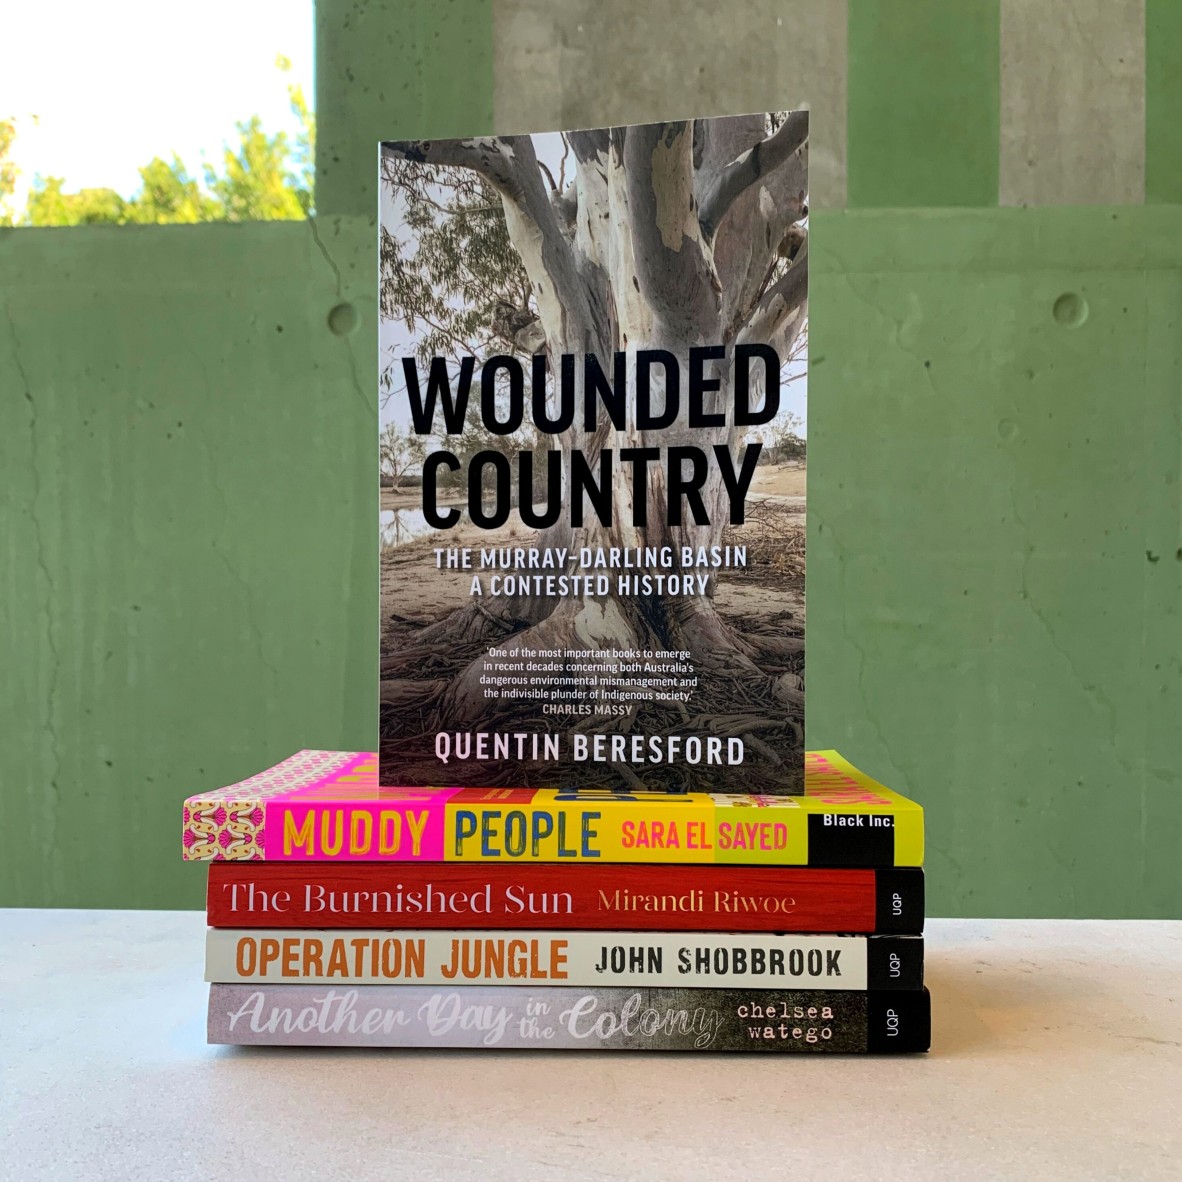 Wounded Country a book by Quentin Beresford sits on top of a stack of four other books with a green background